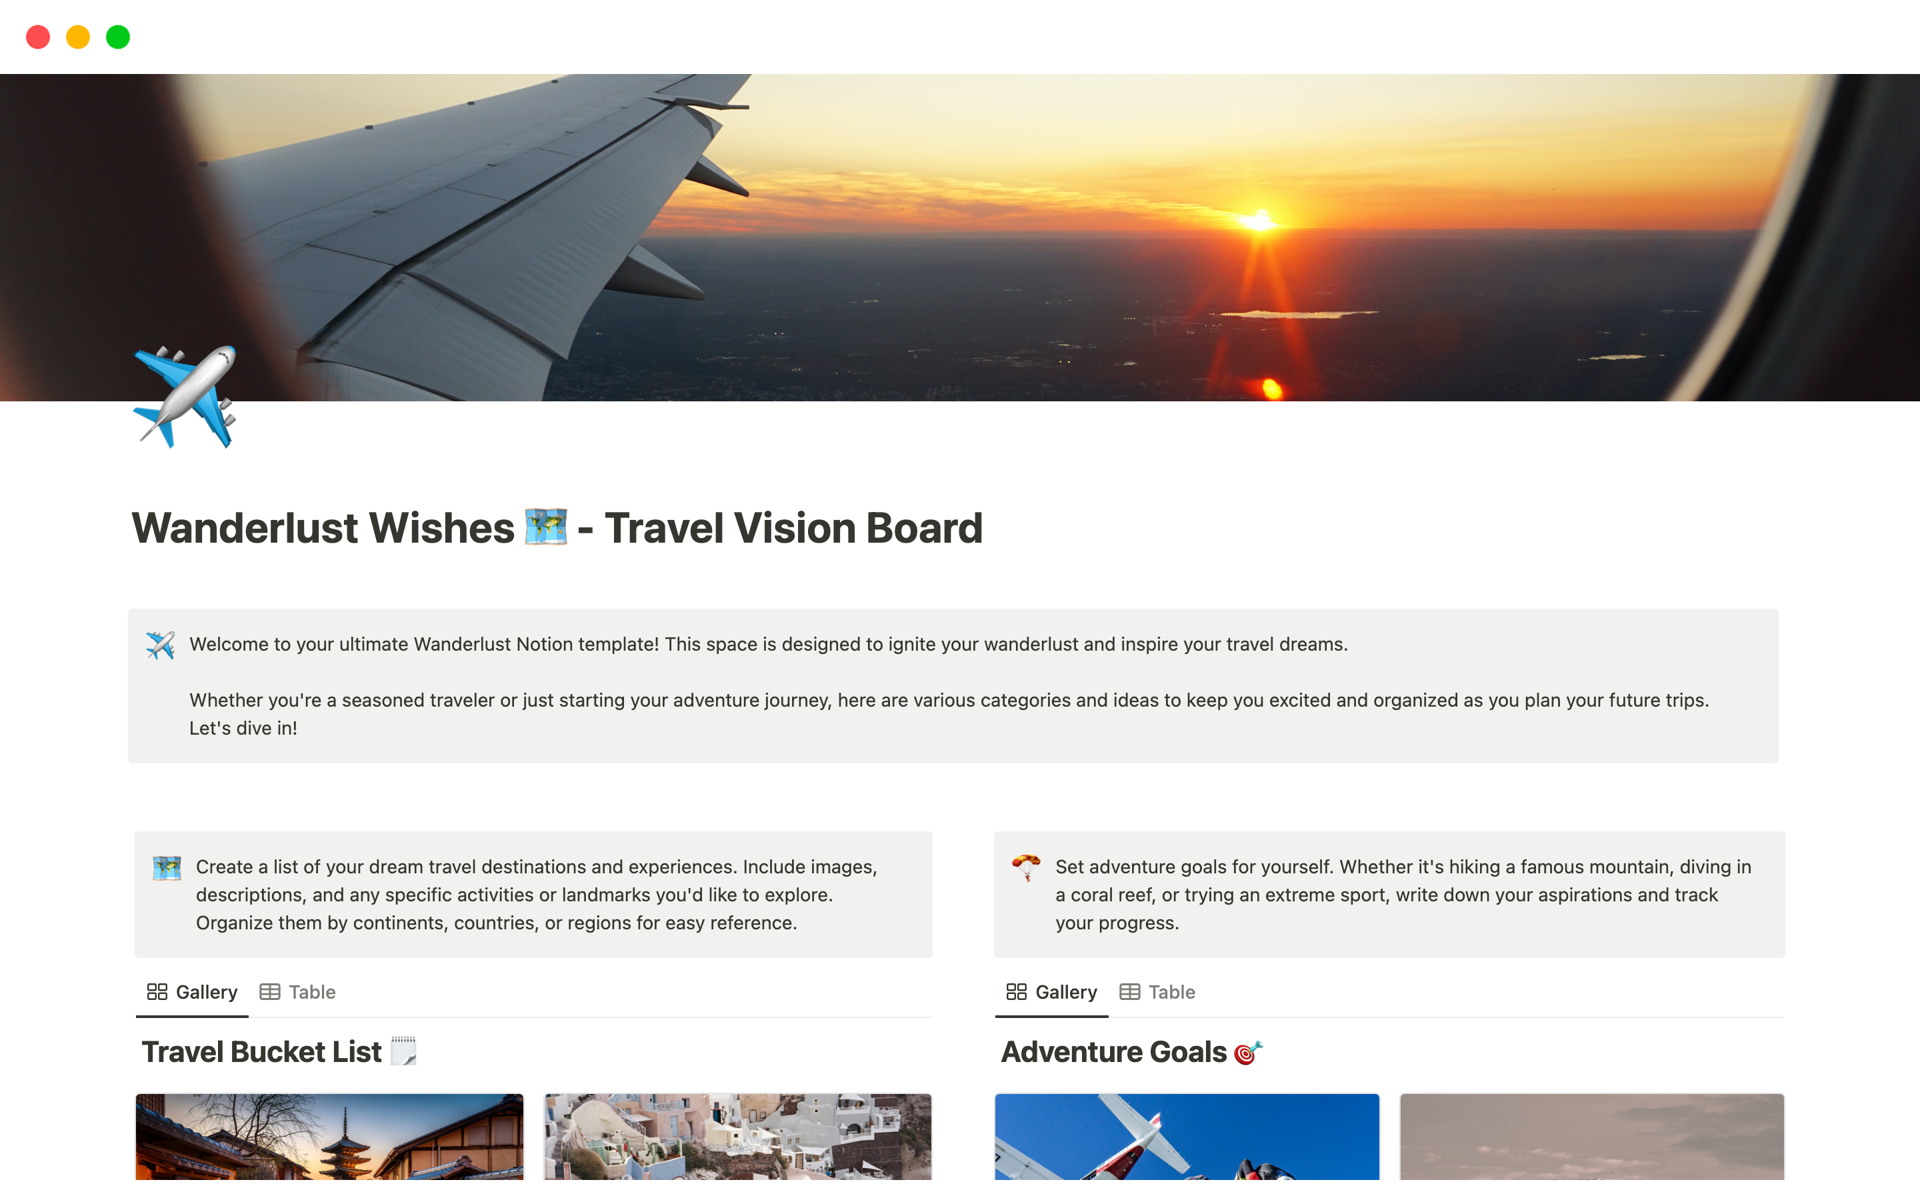 Fuel your wanderlust with Wanderlust 🗺️ - Travel Vision Board, featuring 4 databases for your travel bucket list, adventure goals, road trip ideas, and must-have travel essentials 🌍